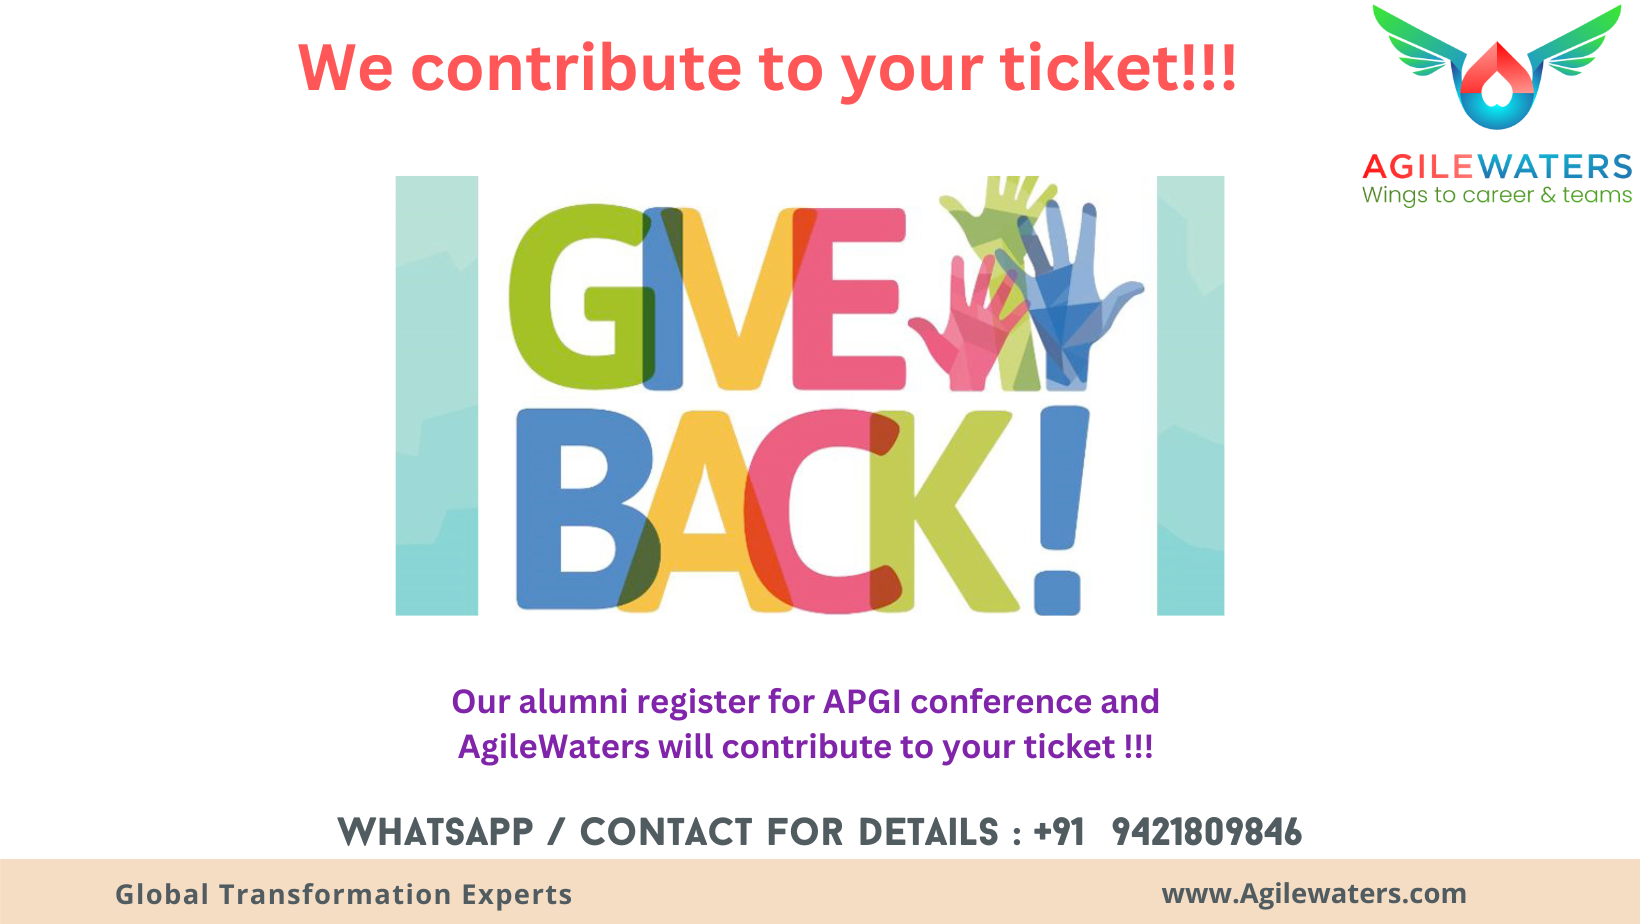 :“https://agilewaters.com/wp-content/uploads/2023/01/APGI-Give-Back-to-Alumni.png